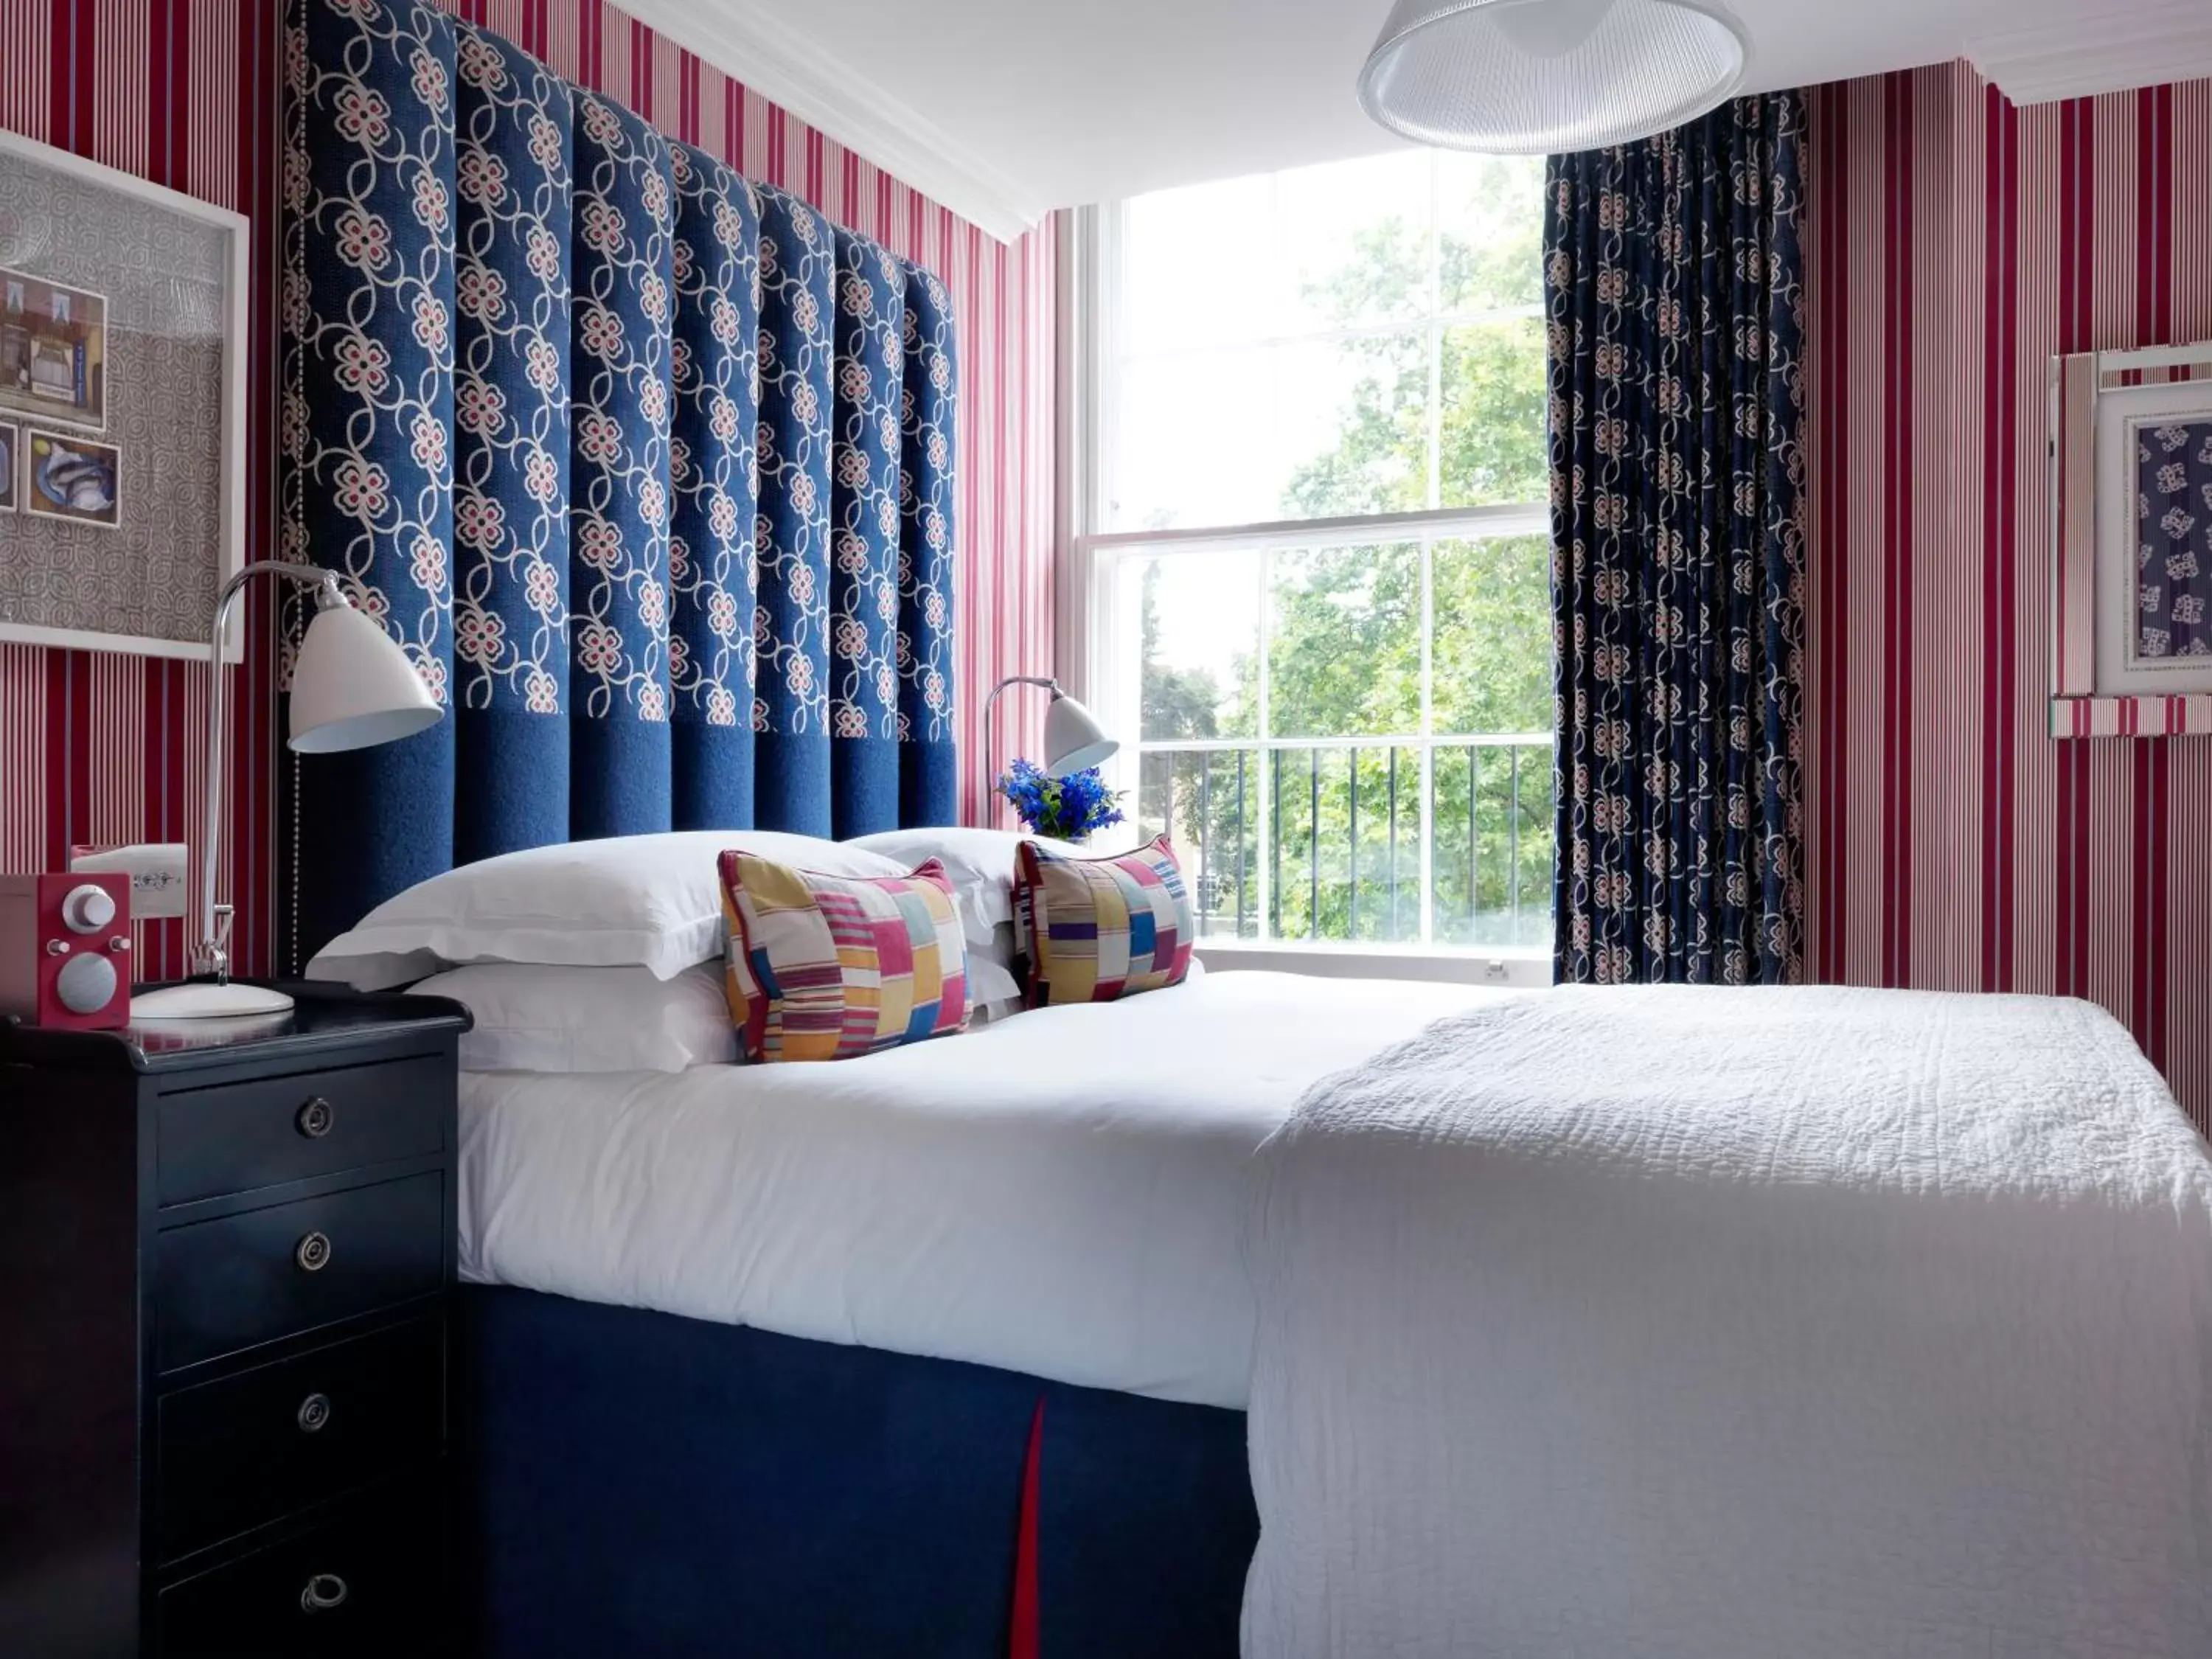 Bed in Dorset Square Hotel, Firmdale Hotels